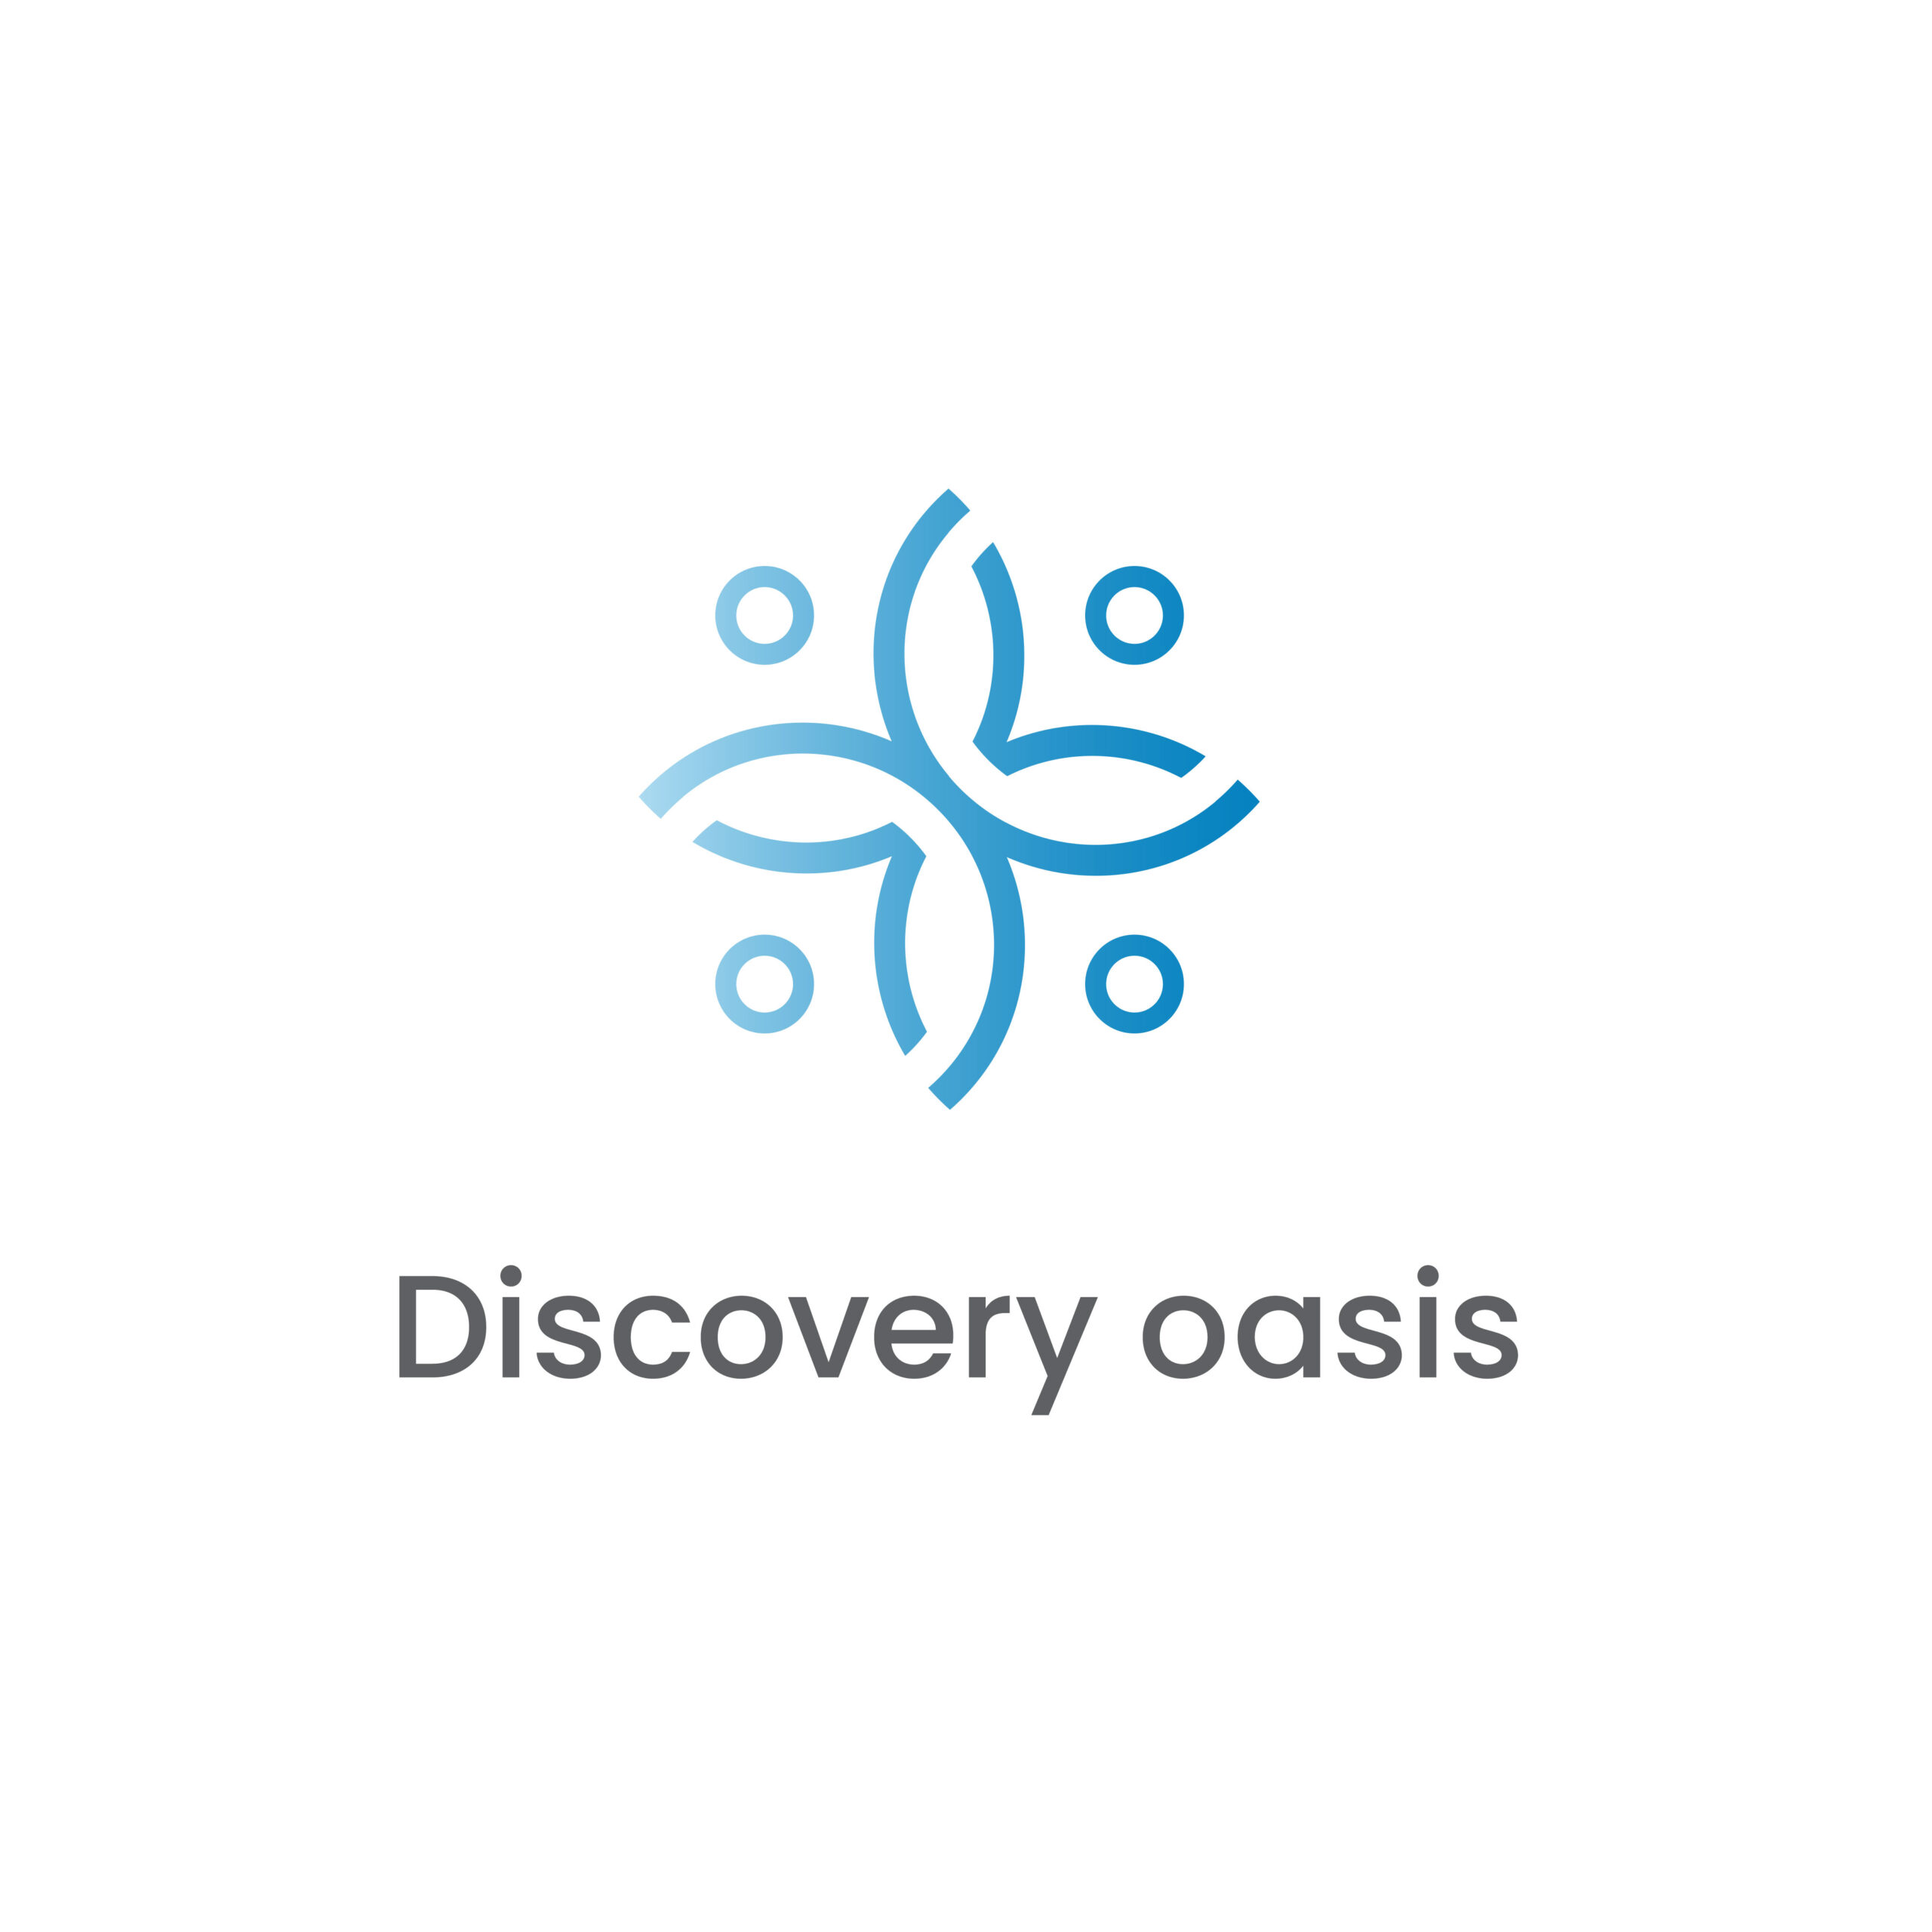 Discovery-oasis-logo-variations-04